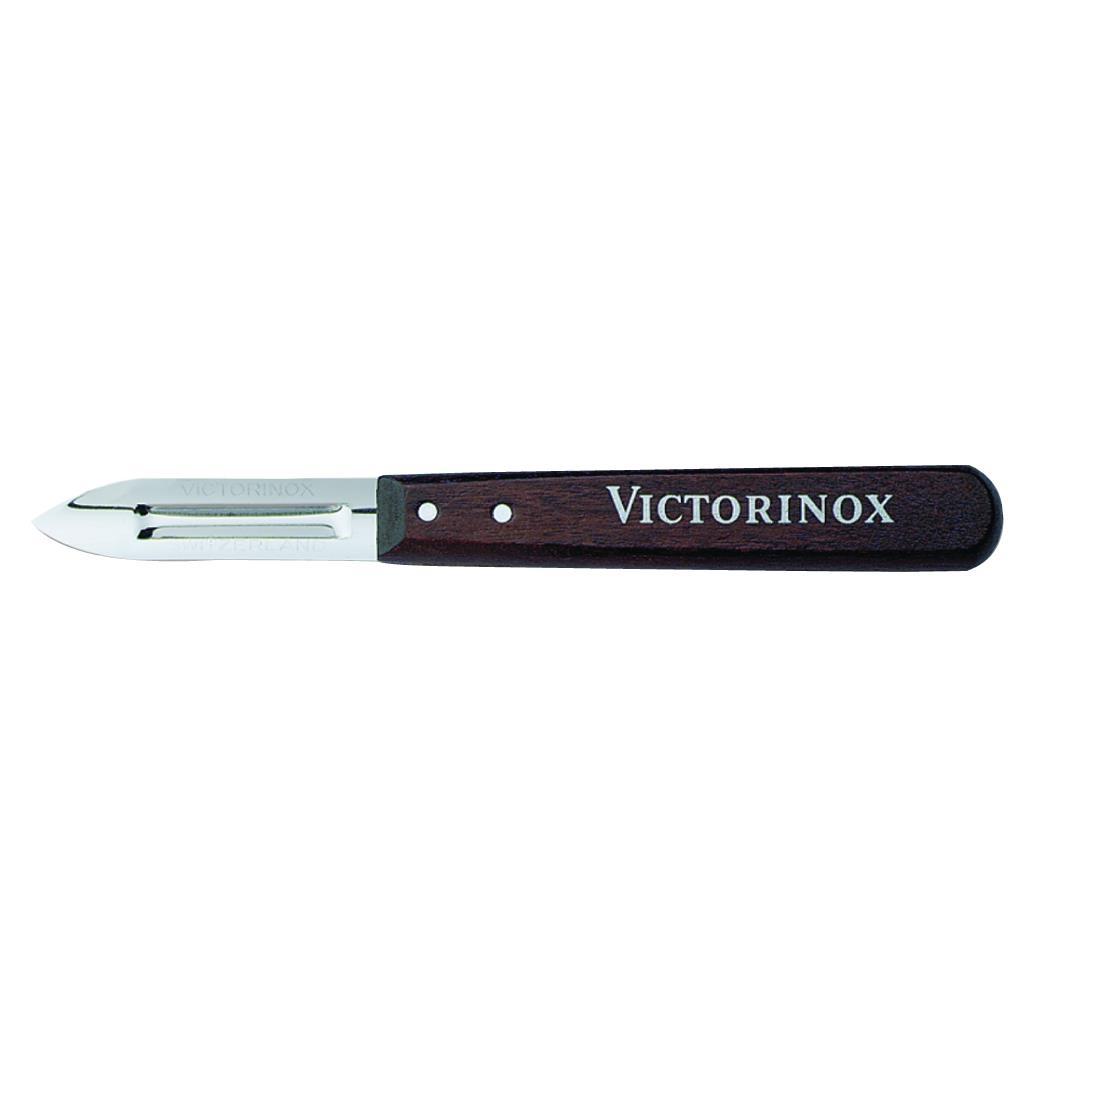 Victorinox 21.5cm Chefs Knife with Hygiplas and Vogue Knife Set - F221  - 5